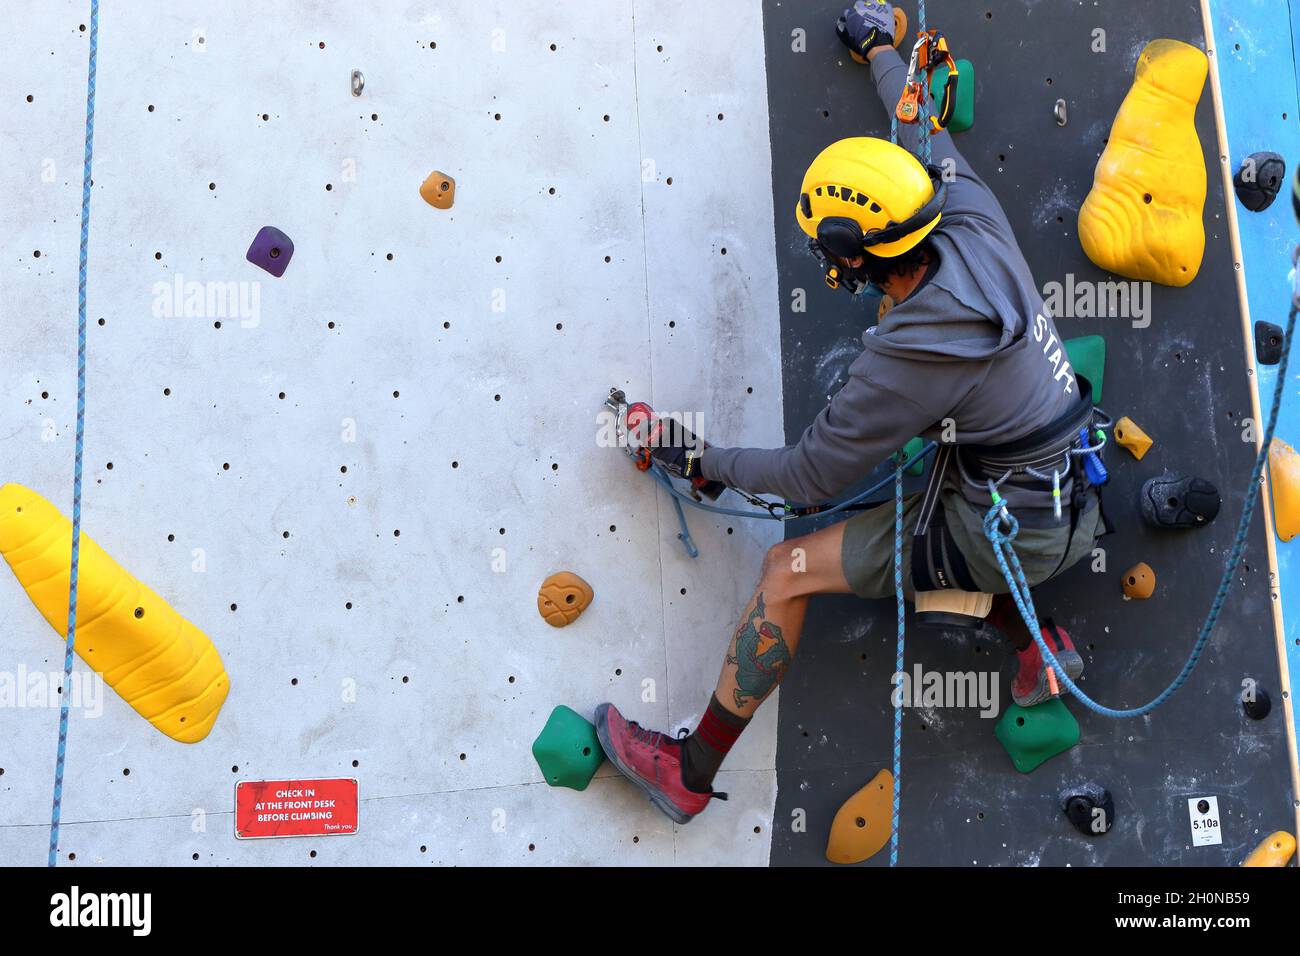 A worker in climbing gear and safety harness installing equipment on a rock climbing wall. Stock Photo